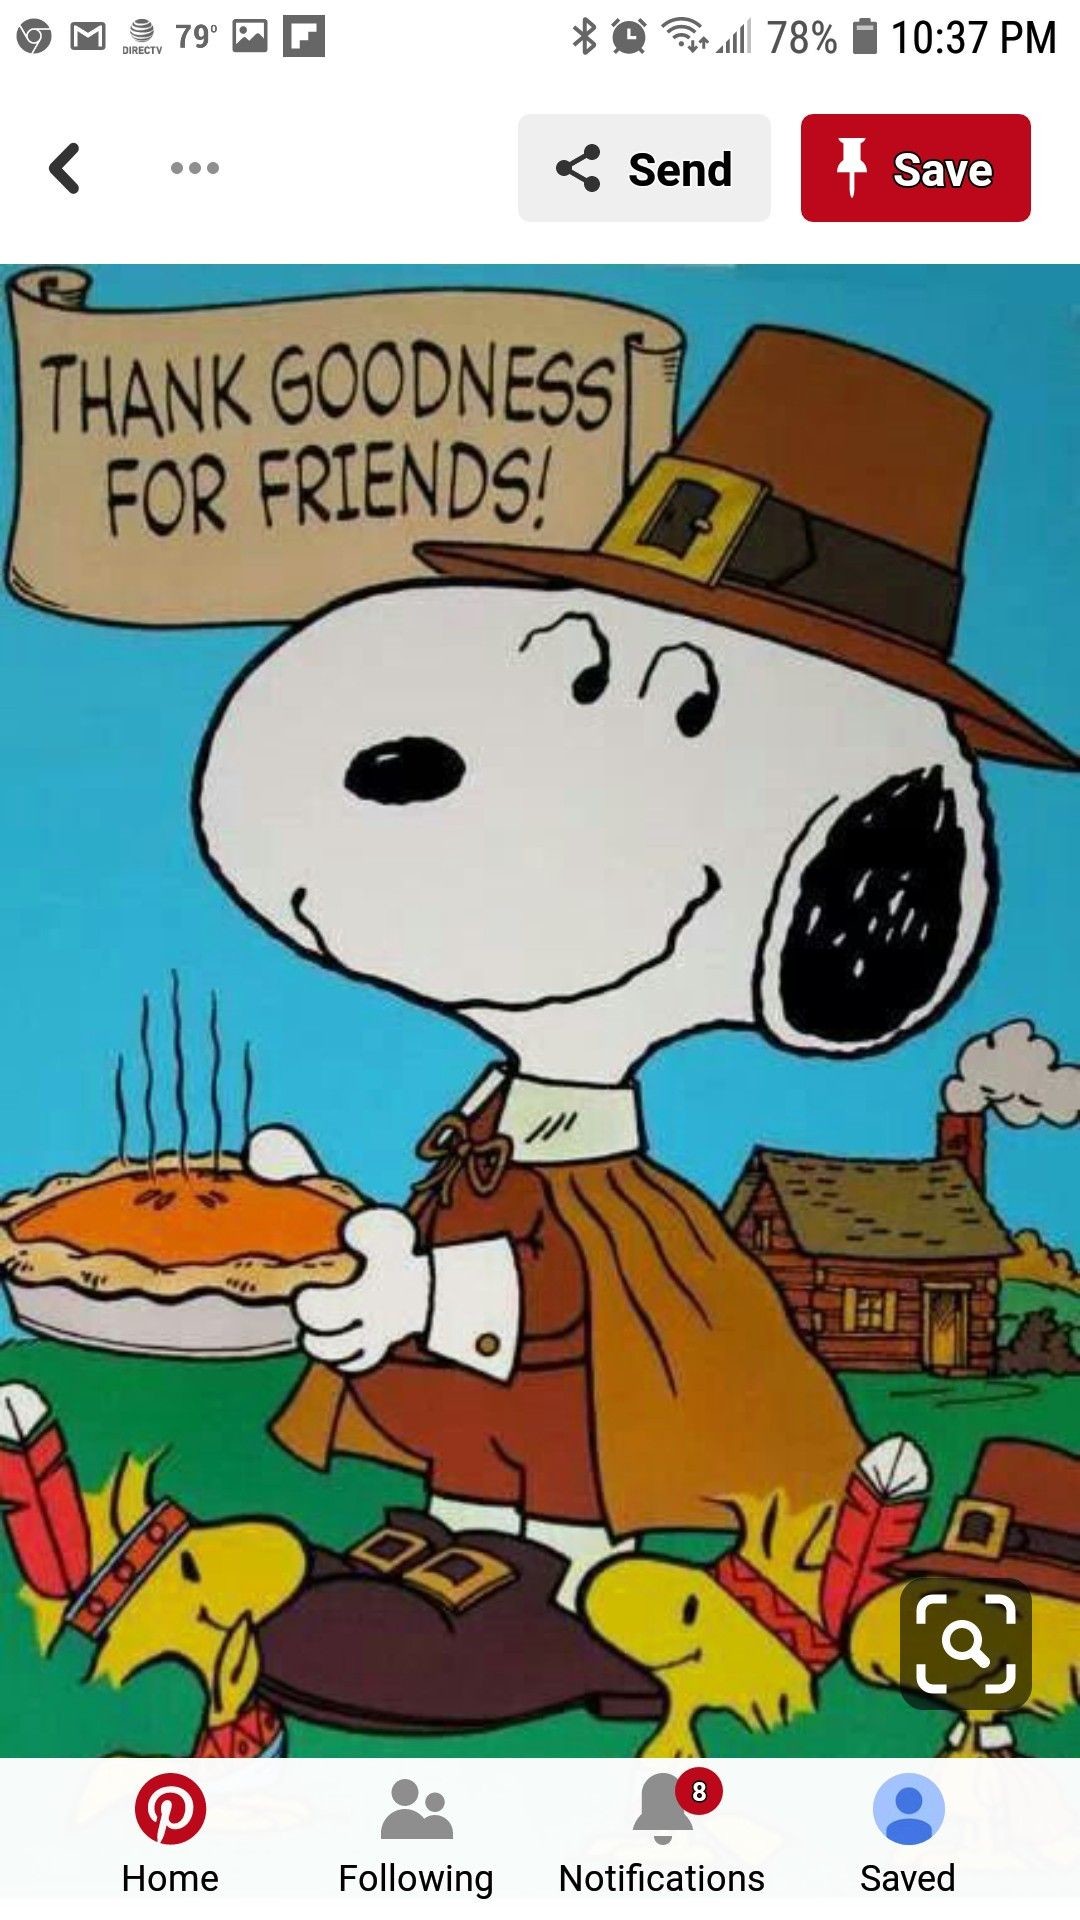 1080x1920 Thanksgiving Snoopy, Charlie Brown Thanksgiving, Thanksgiving Greetings,  Thanksgiving Pictures, Thanksgiving Parties,